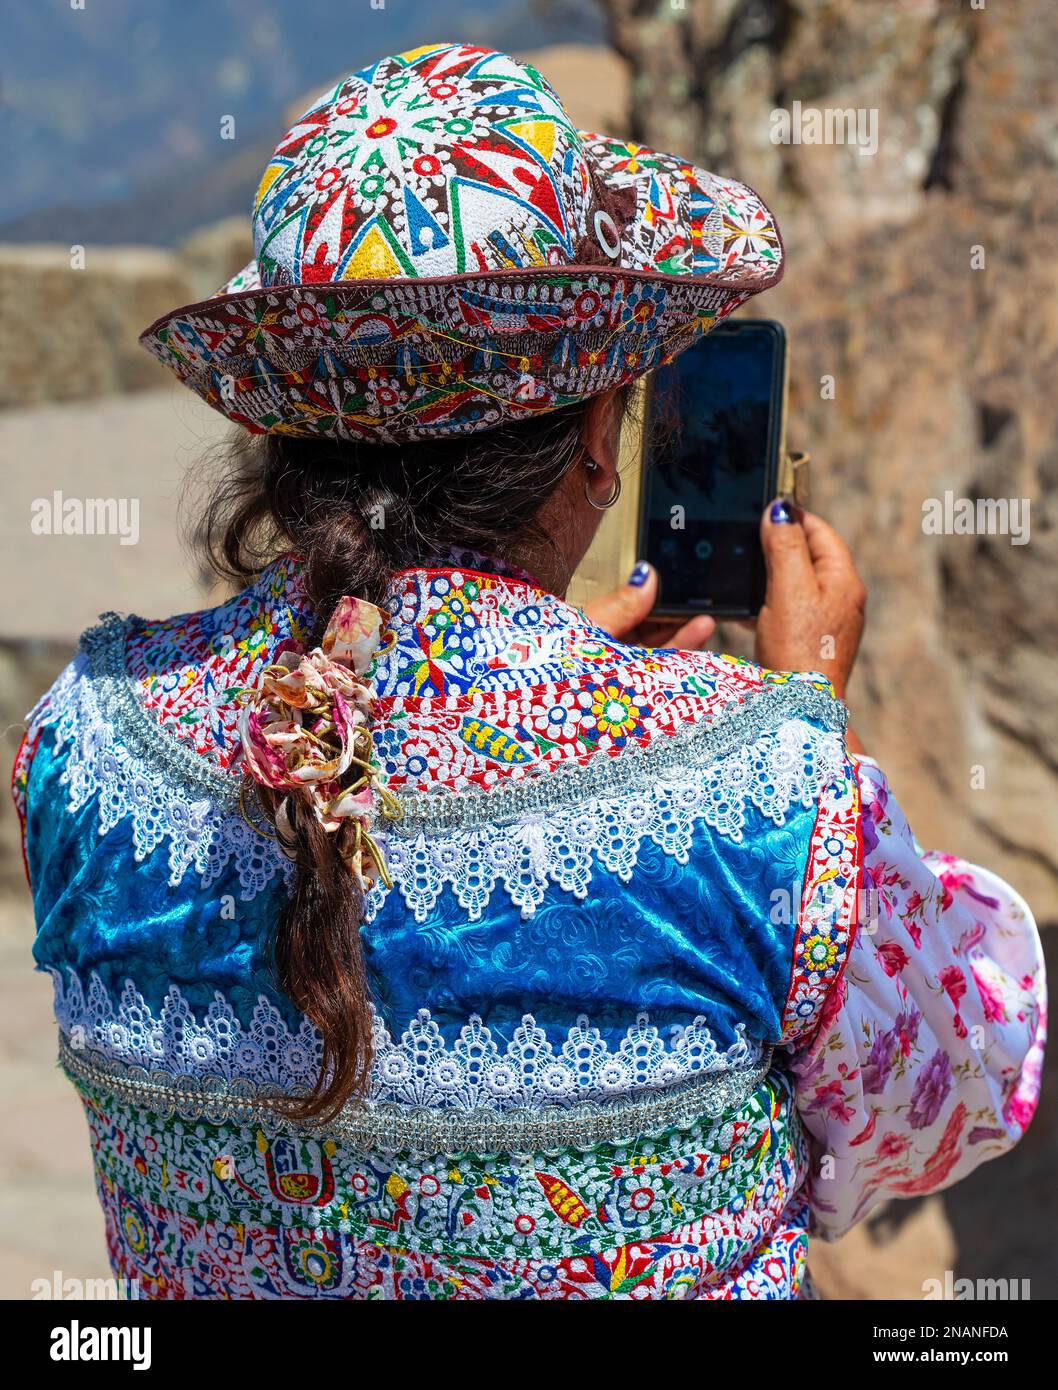 Indigenous senior peruvian Quechua woman in traditional clothing taking photographs with her smartphone, Cusco, Peru. Modern technology in communities. Stock Photo